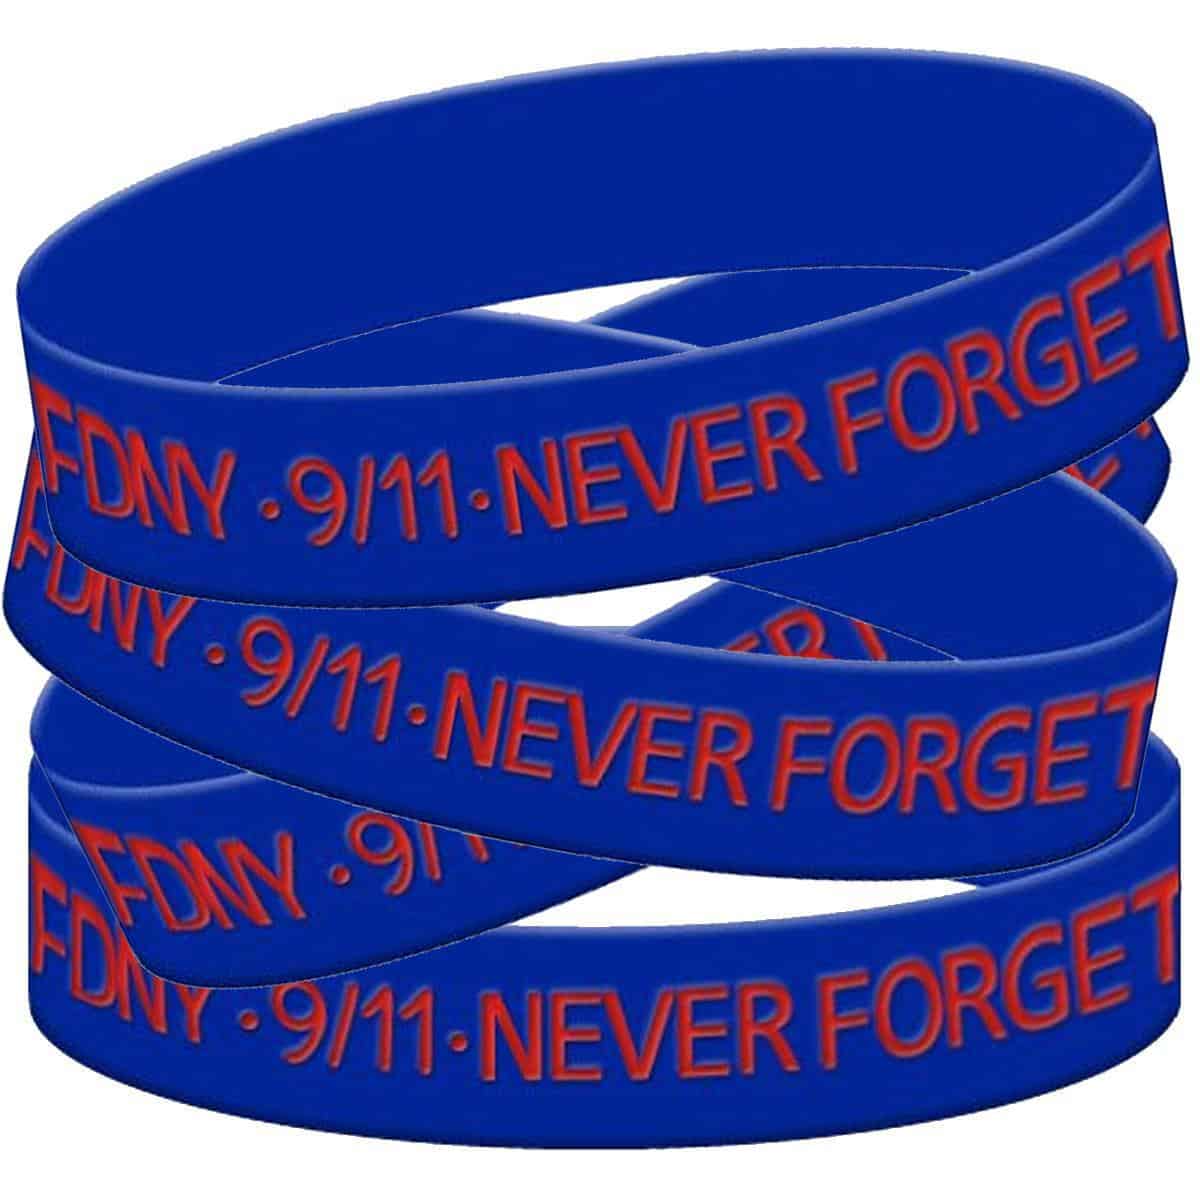 9/11 Never Forget Silicone Bracelet